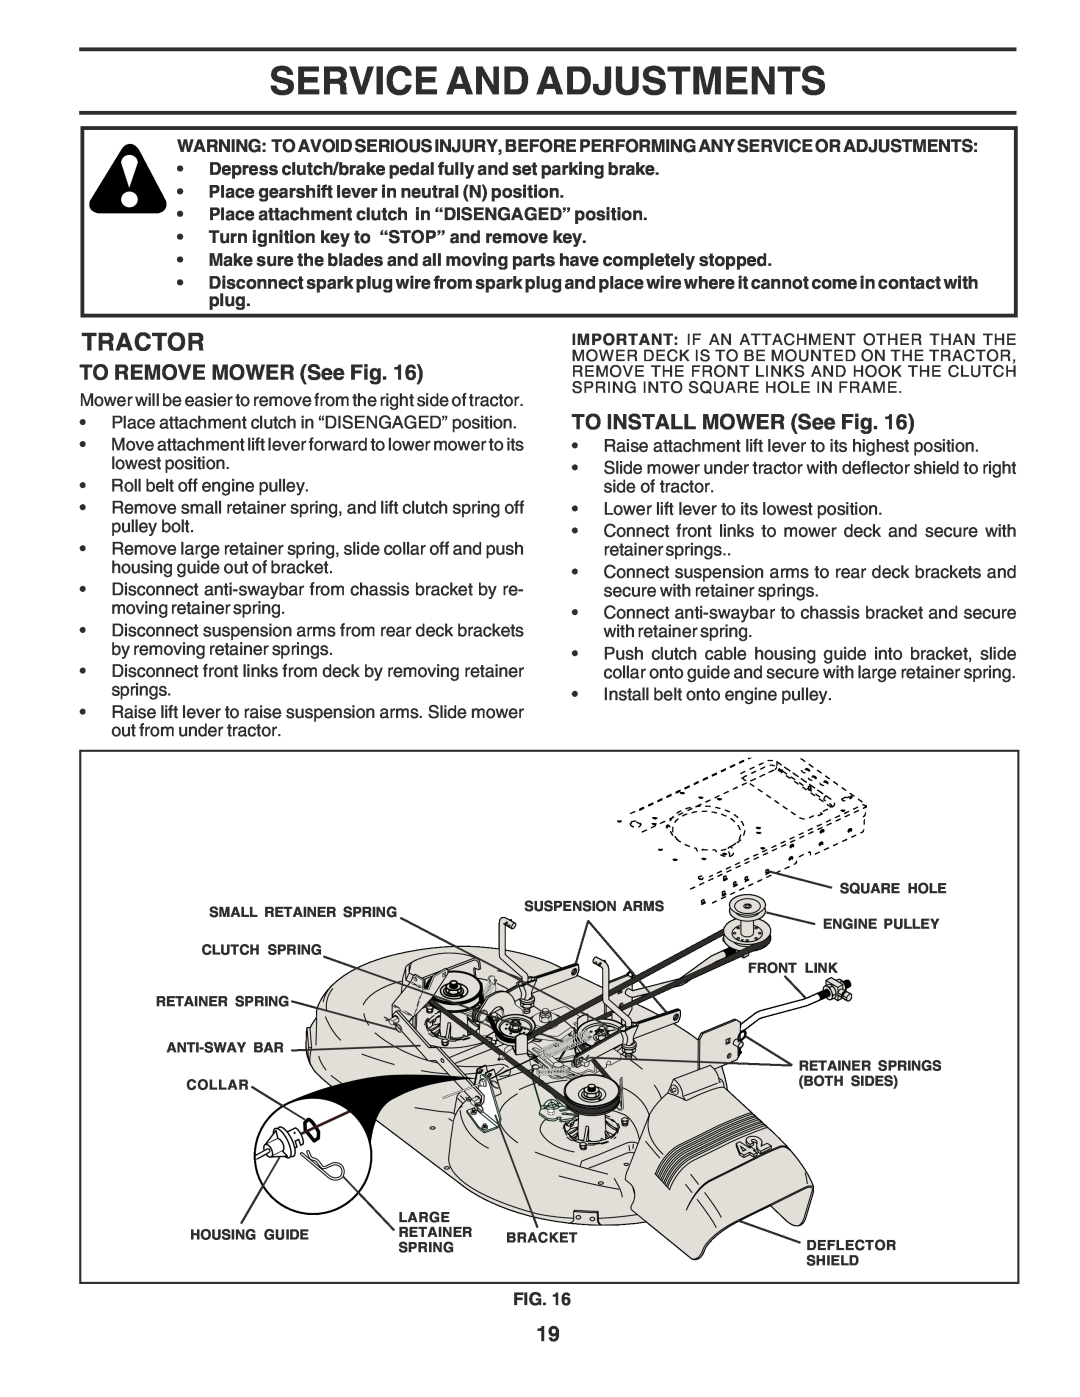 Poulan 181377 owner manual Service And Adjustments, TO REMOVE MOWER See Fig, TO INSTALL MOWER See Fig, Tractor 